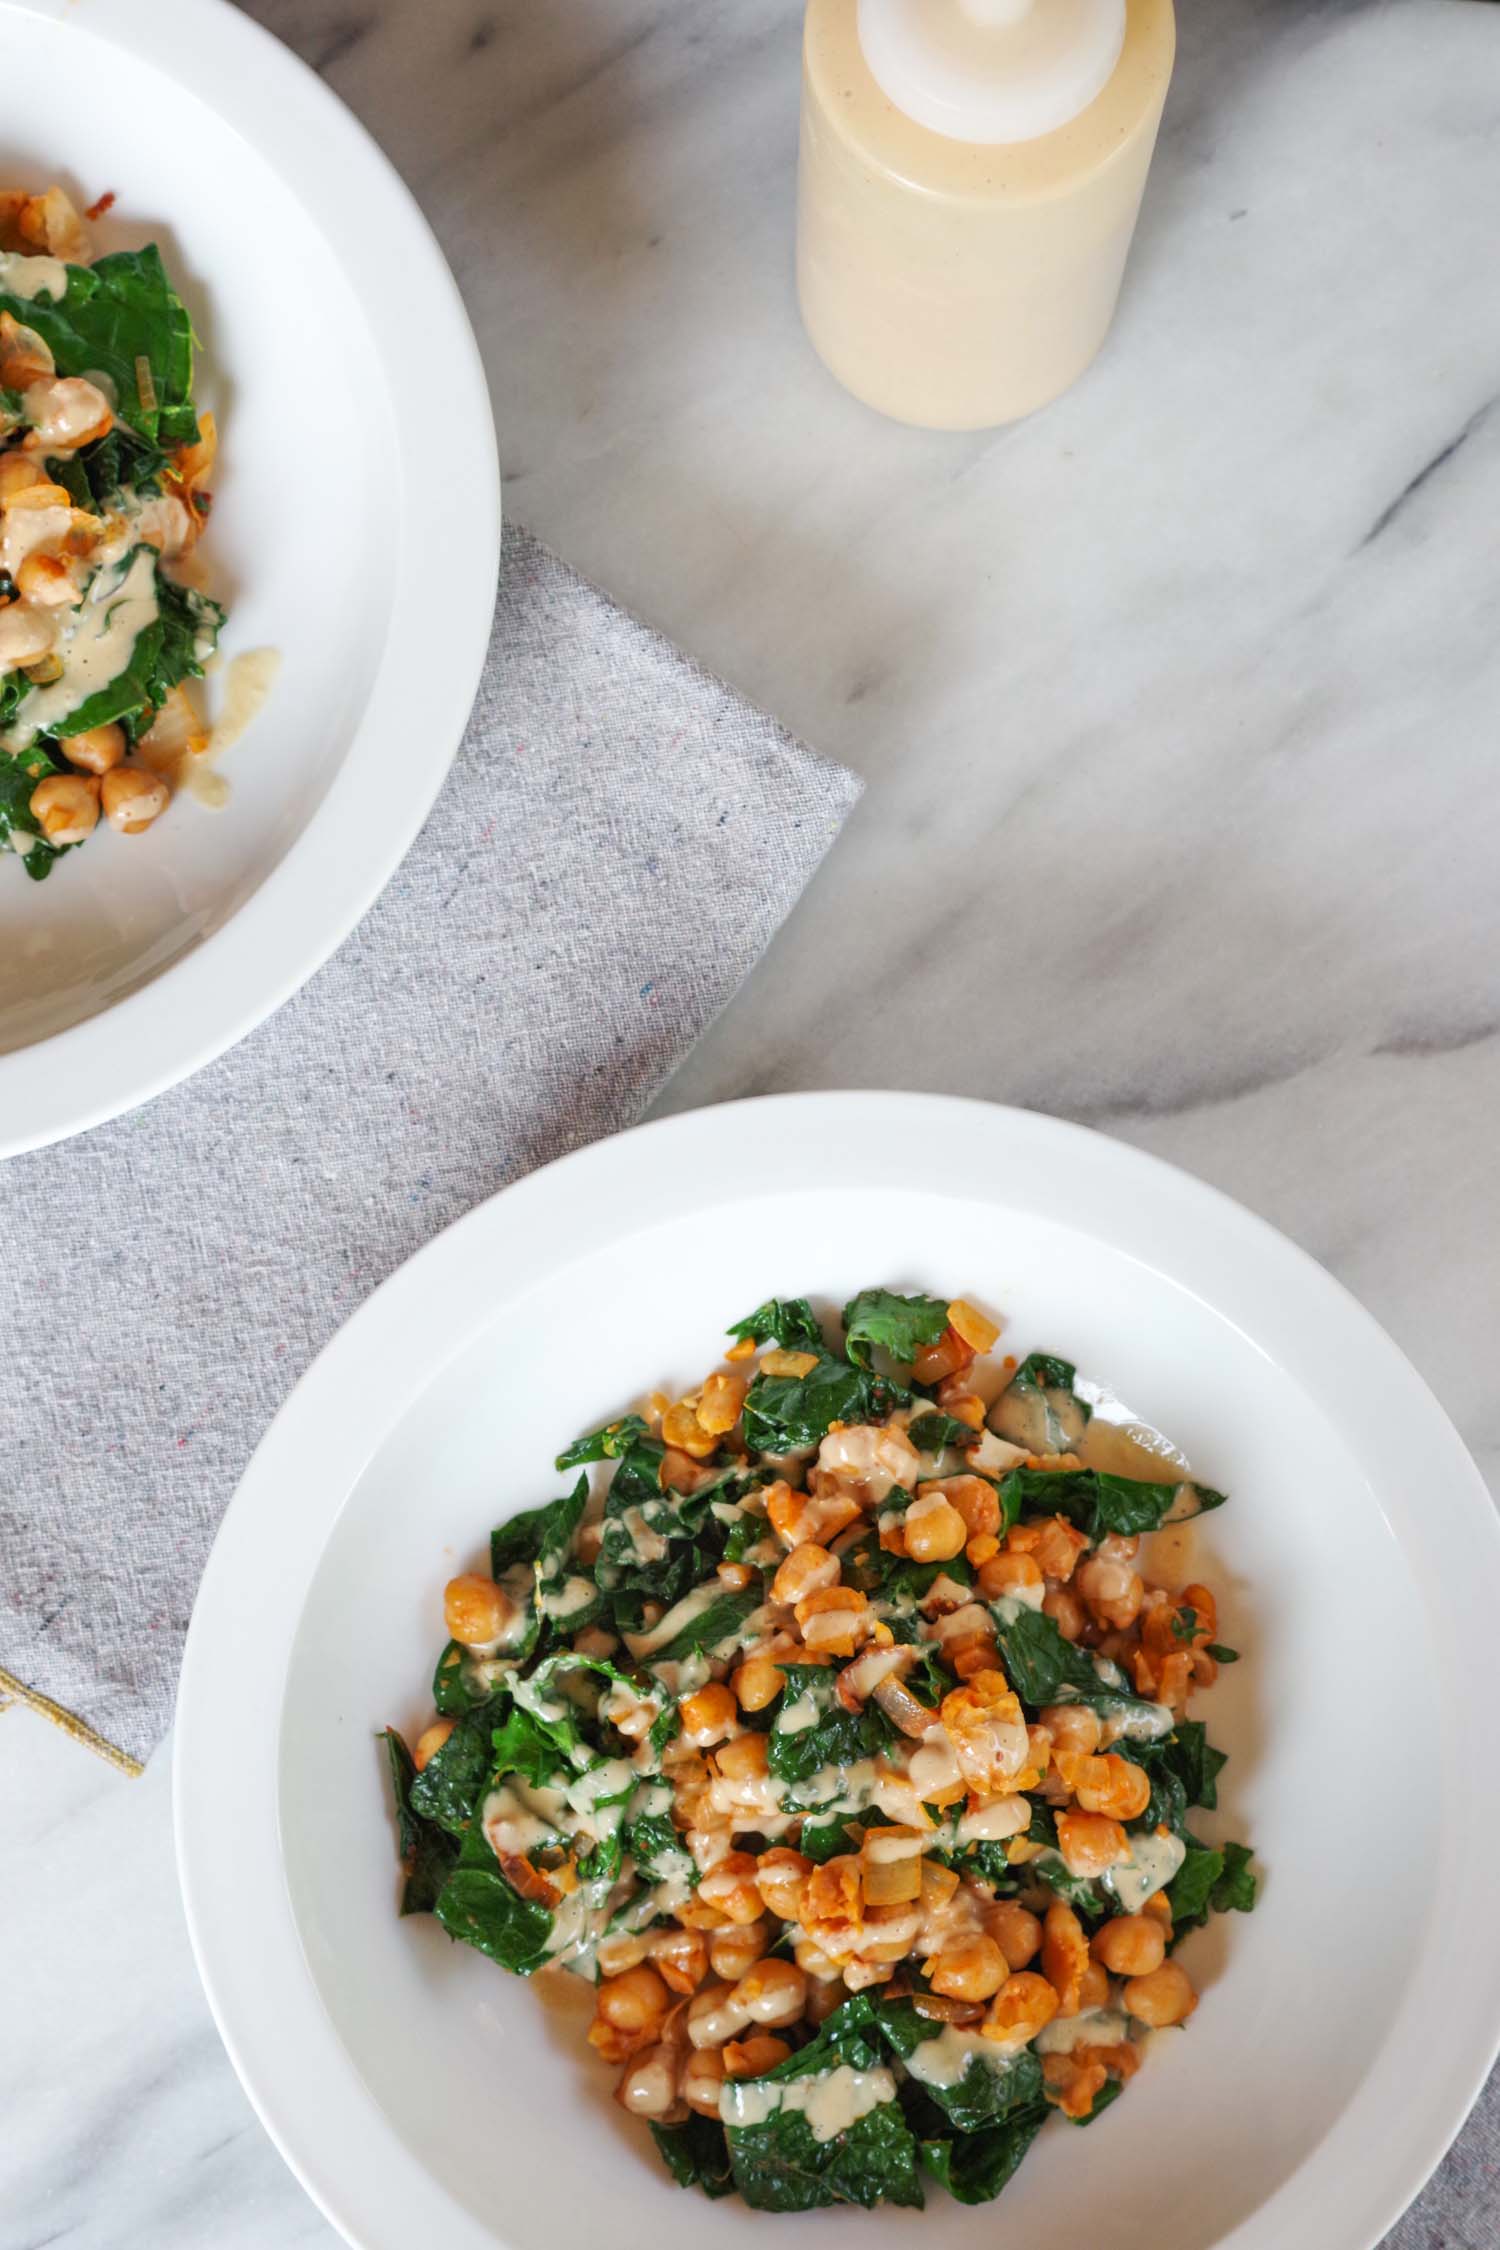 Smoky Kale and Chickpeas with Miso Peanut Drizzle, from the  Bold Flavored Vegan Cooking  cookbook by Celine Steen. Photo by Beautiful Ingredient.